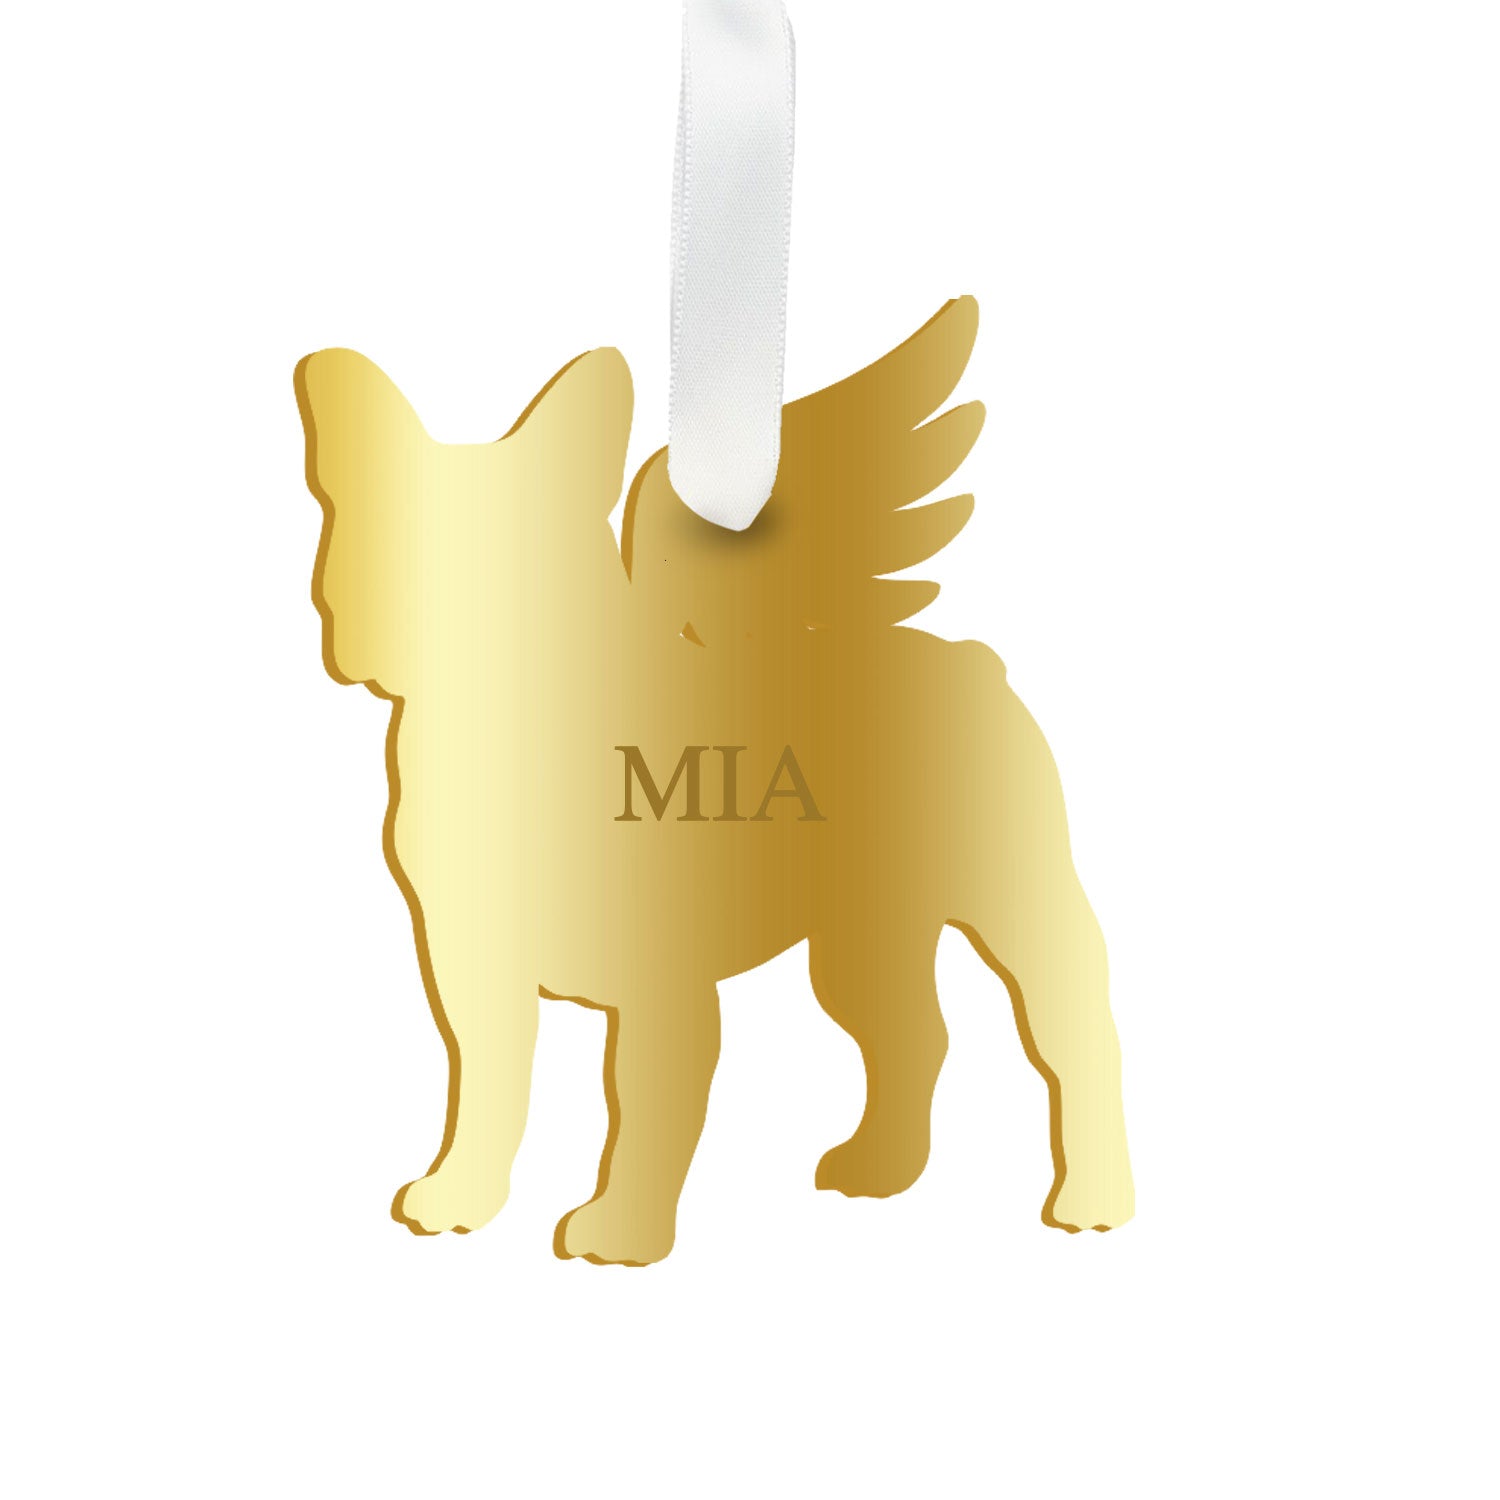 Moon and Lola - Personalized Angel Boston Terrier Ornament with wings in mirrored gold